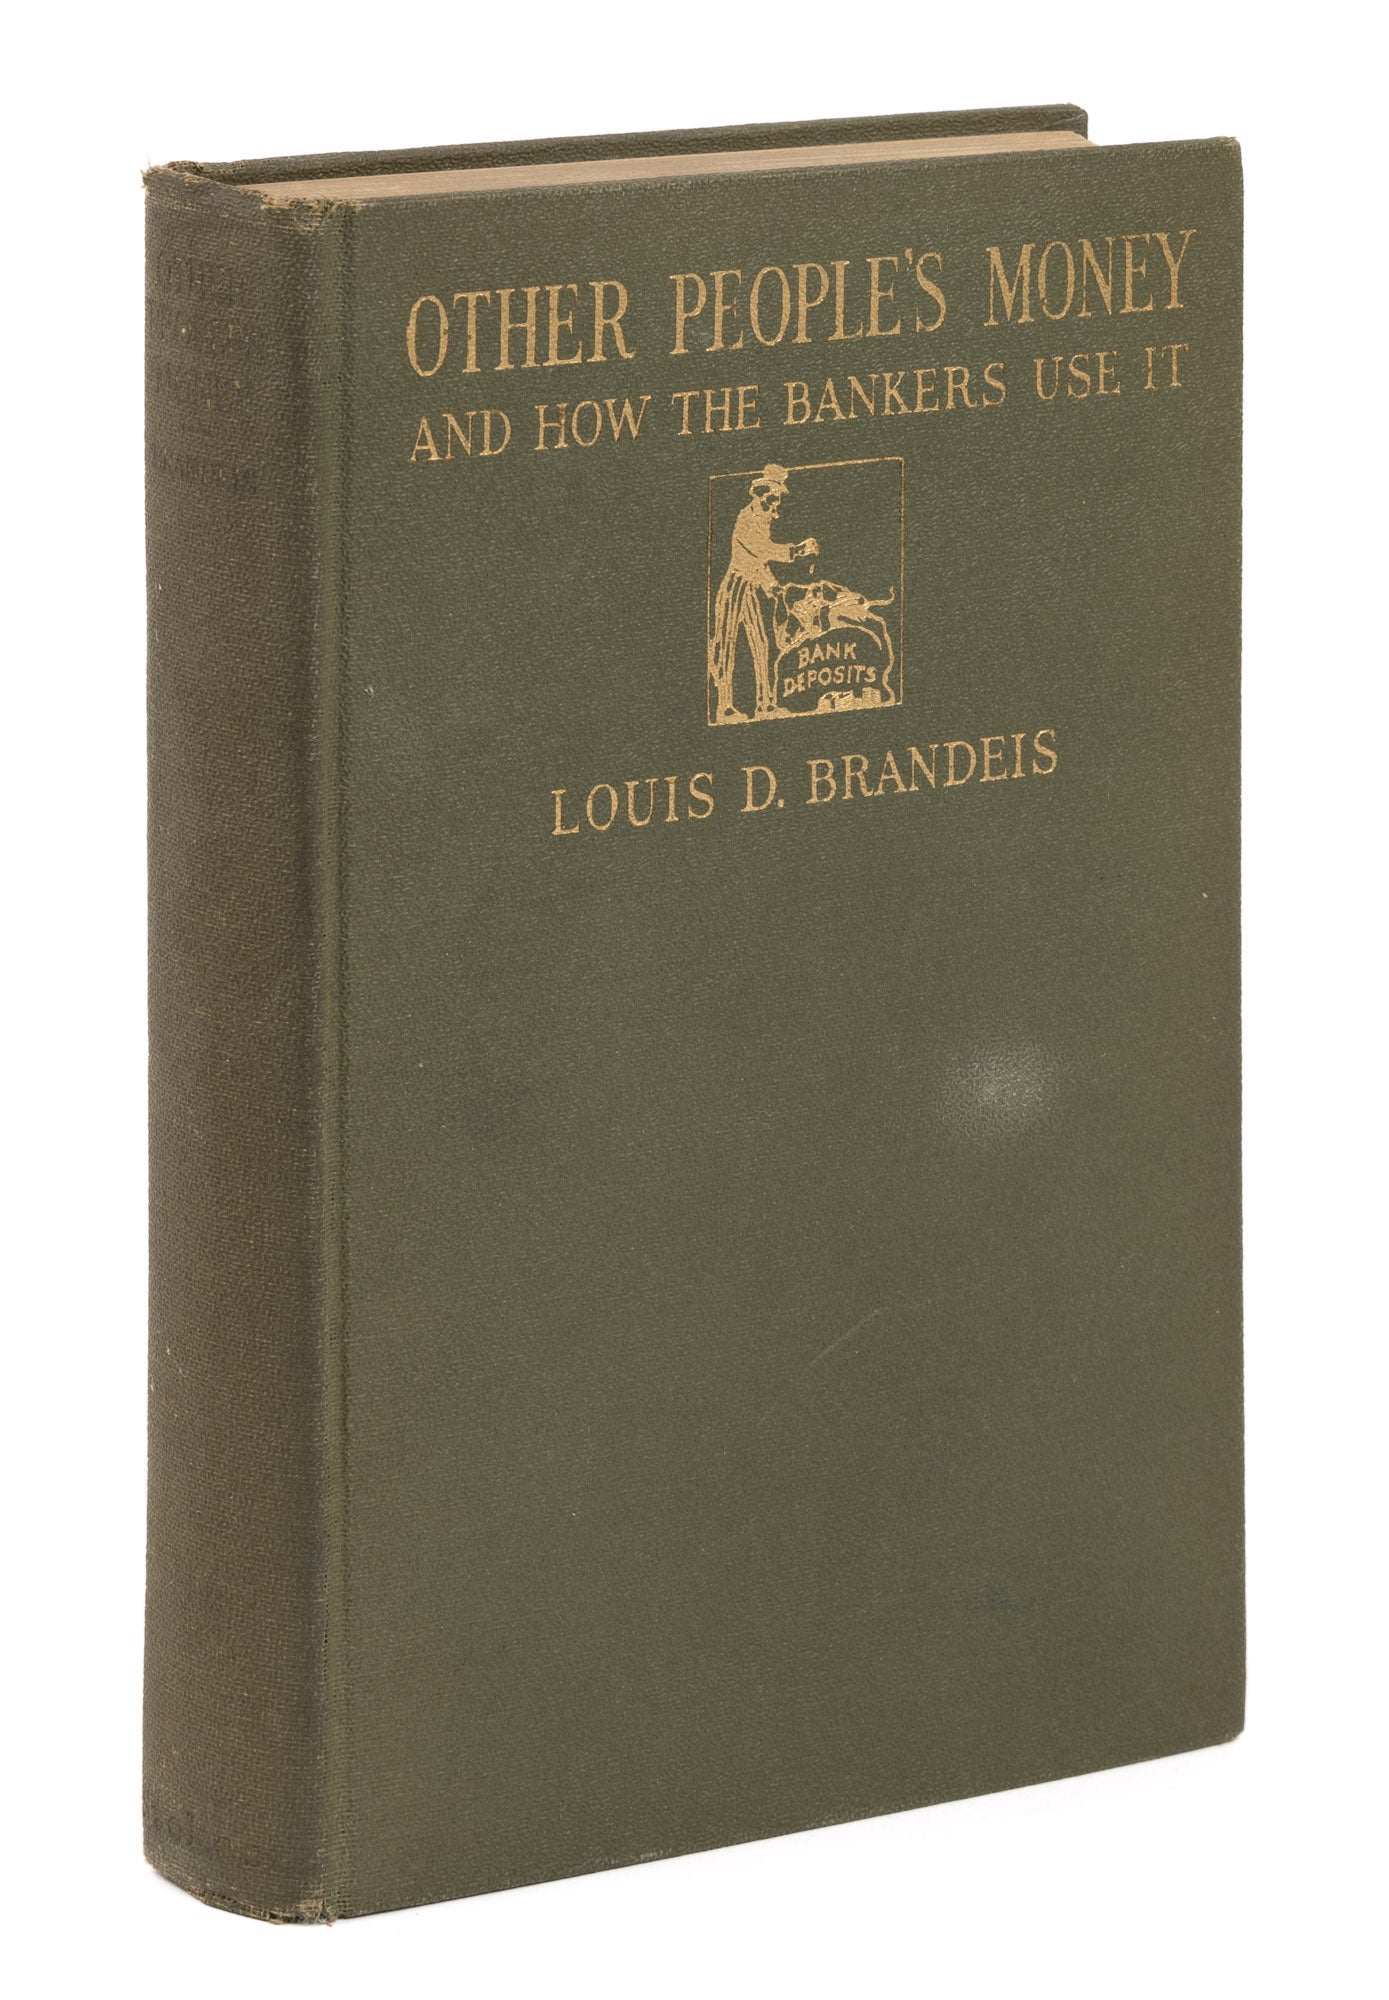 Other People's Money and How The Bankers Use It [Book]